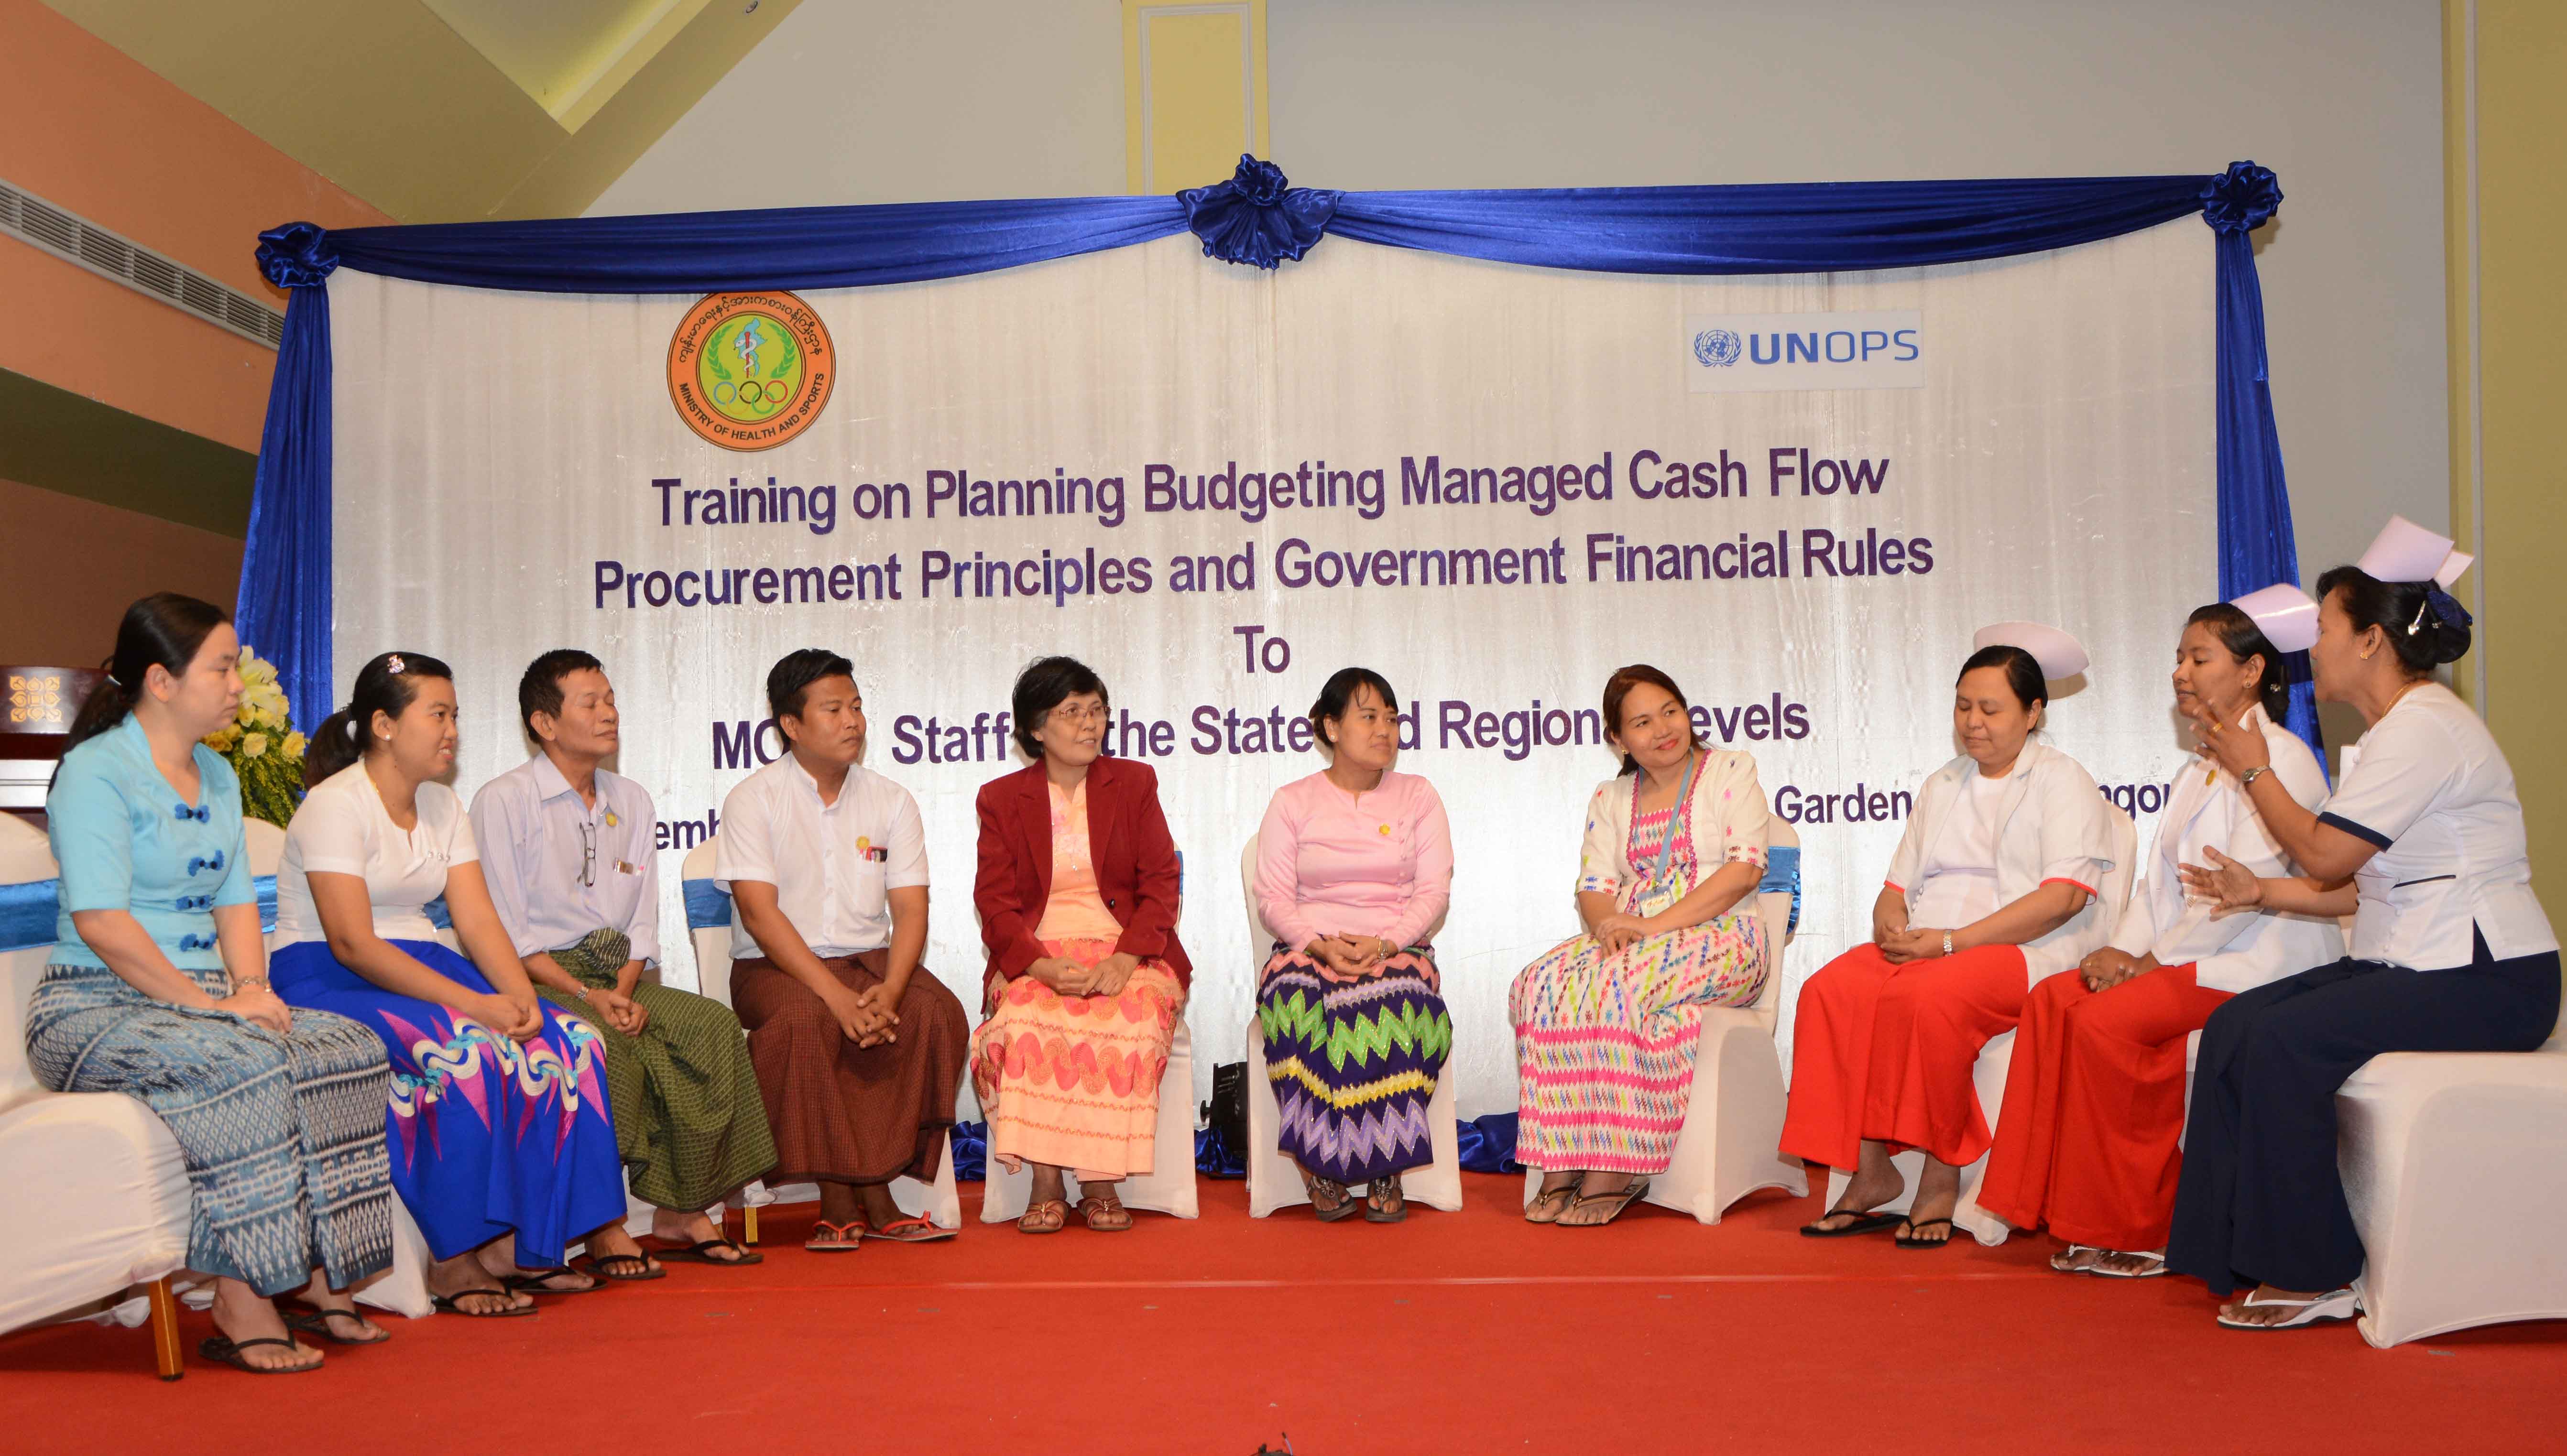 Discussion forum in progress, chaired by Dr Khin Nan Lon, Deputy Director (Disease Control), Yangon Region, MOHS, at the end of the training in Yangon. Photo:UNOPS